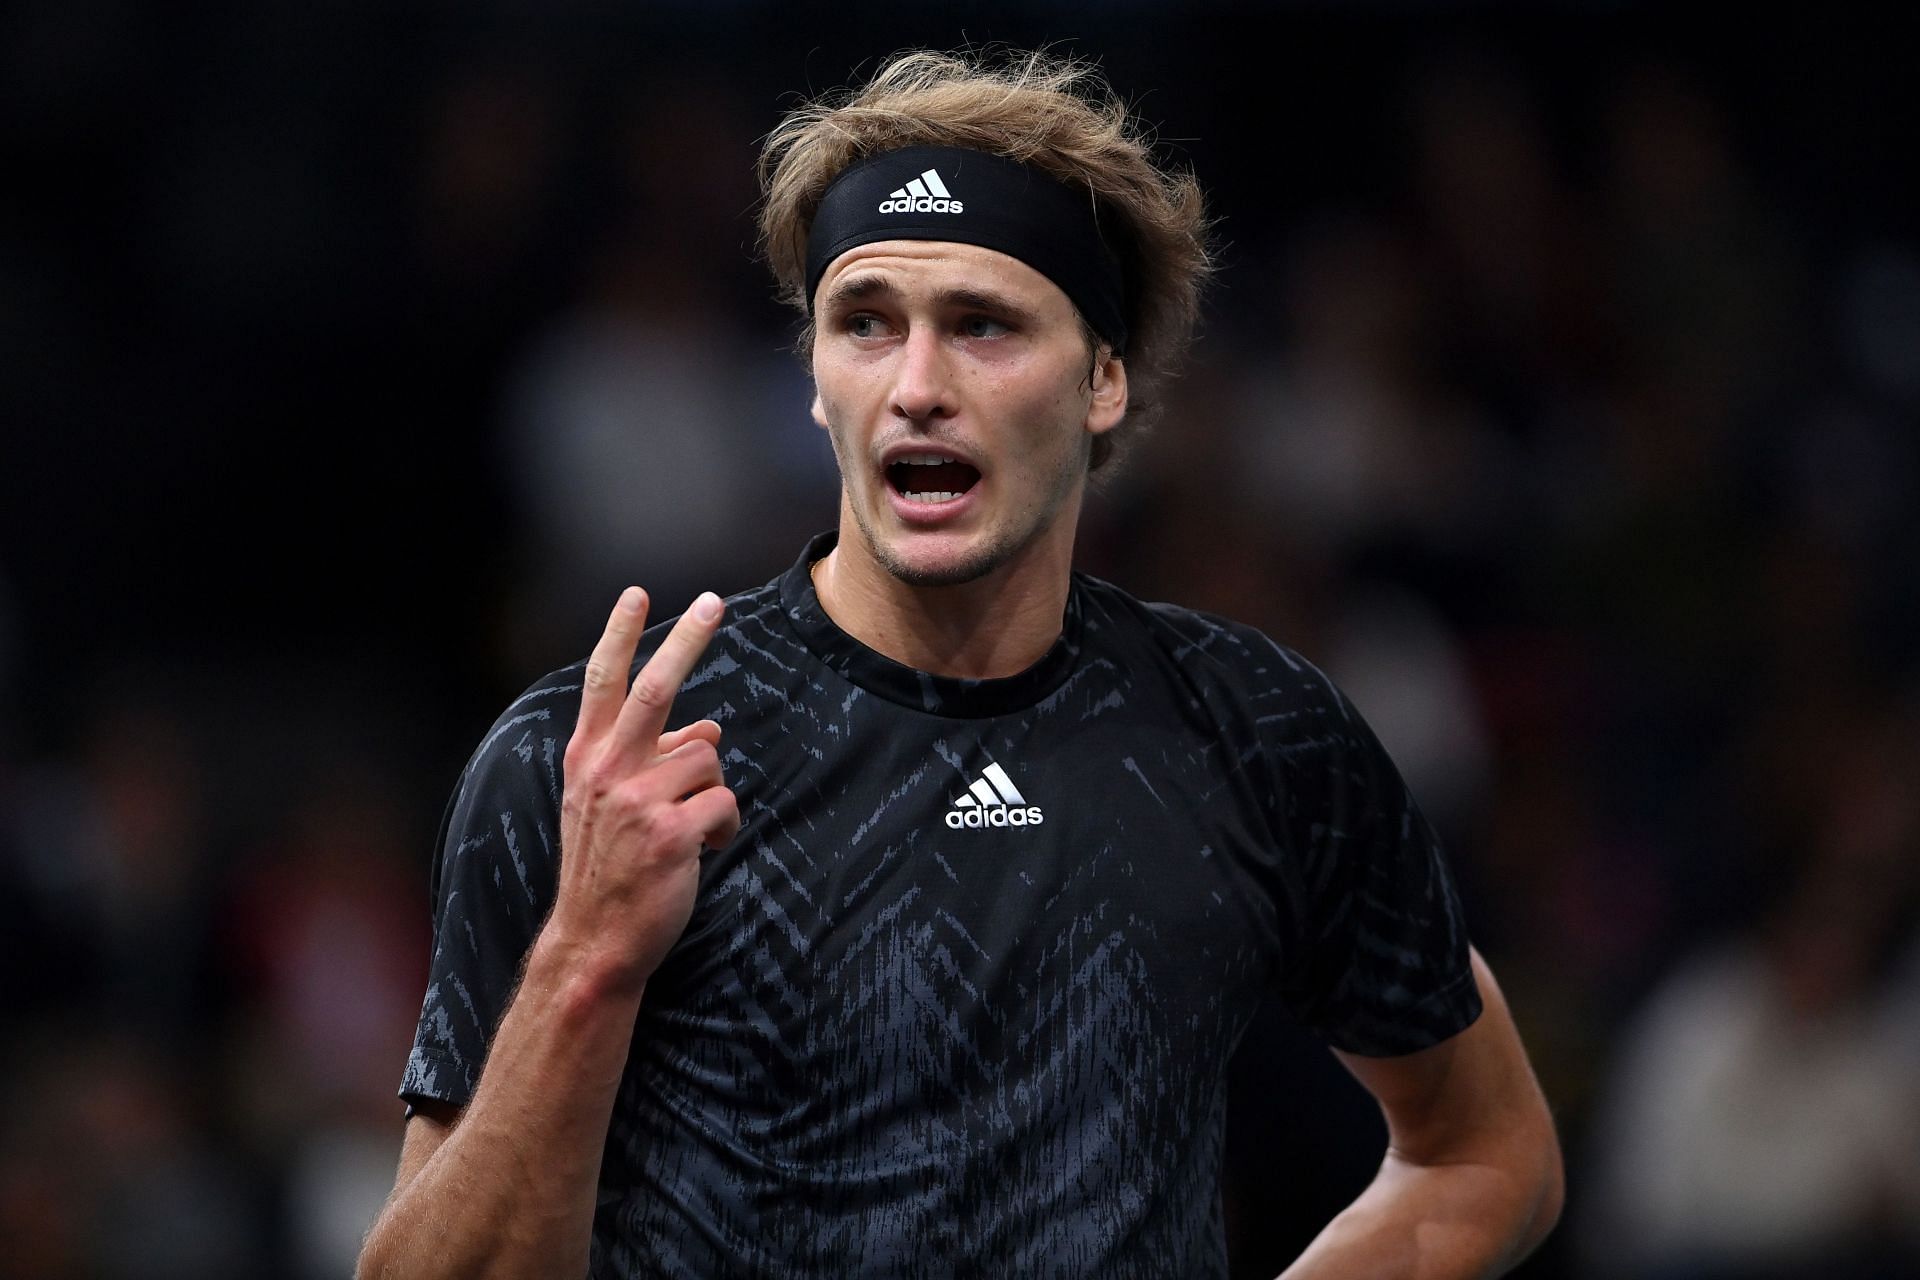 Alexader Zverev has a 9-6 record agaisnt the players in his group.